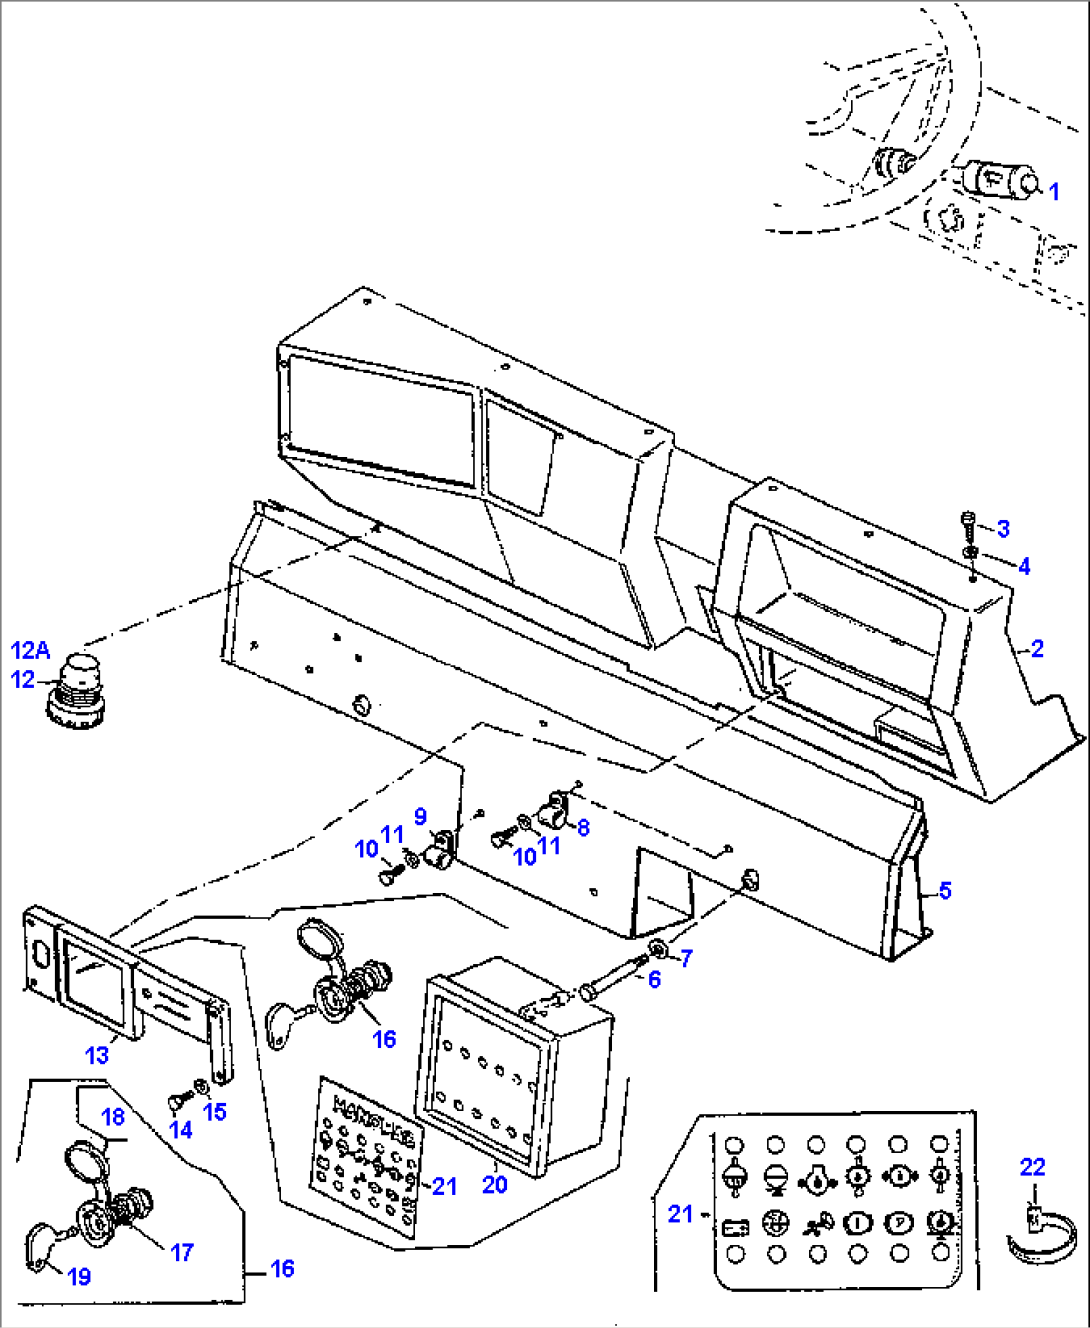 INSTRUMENT BOX AND ATTACHING PARTS